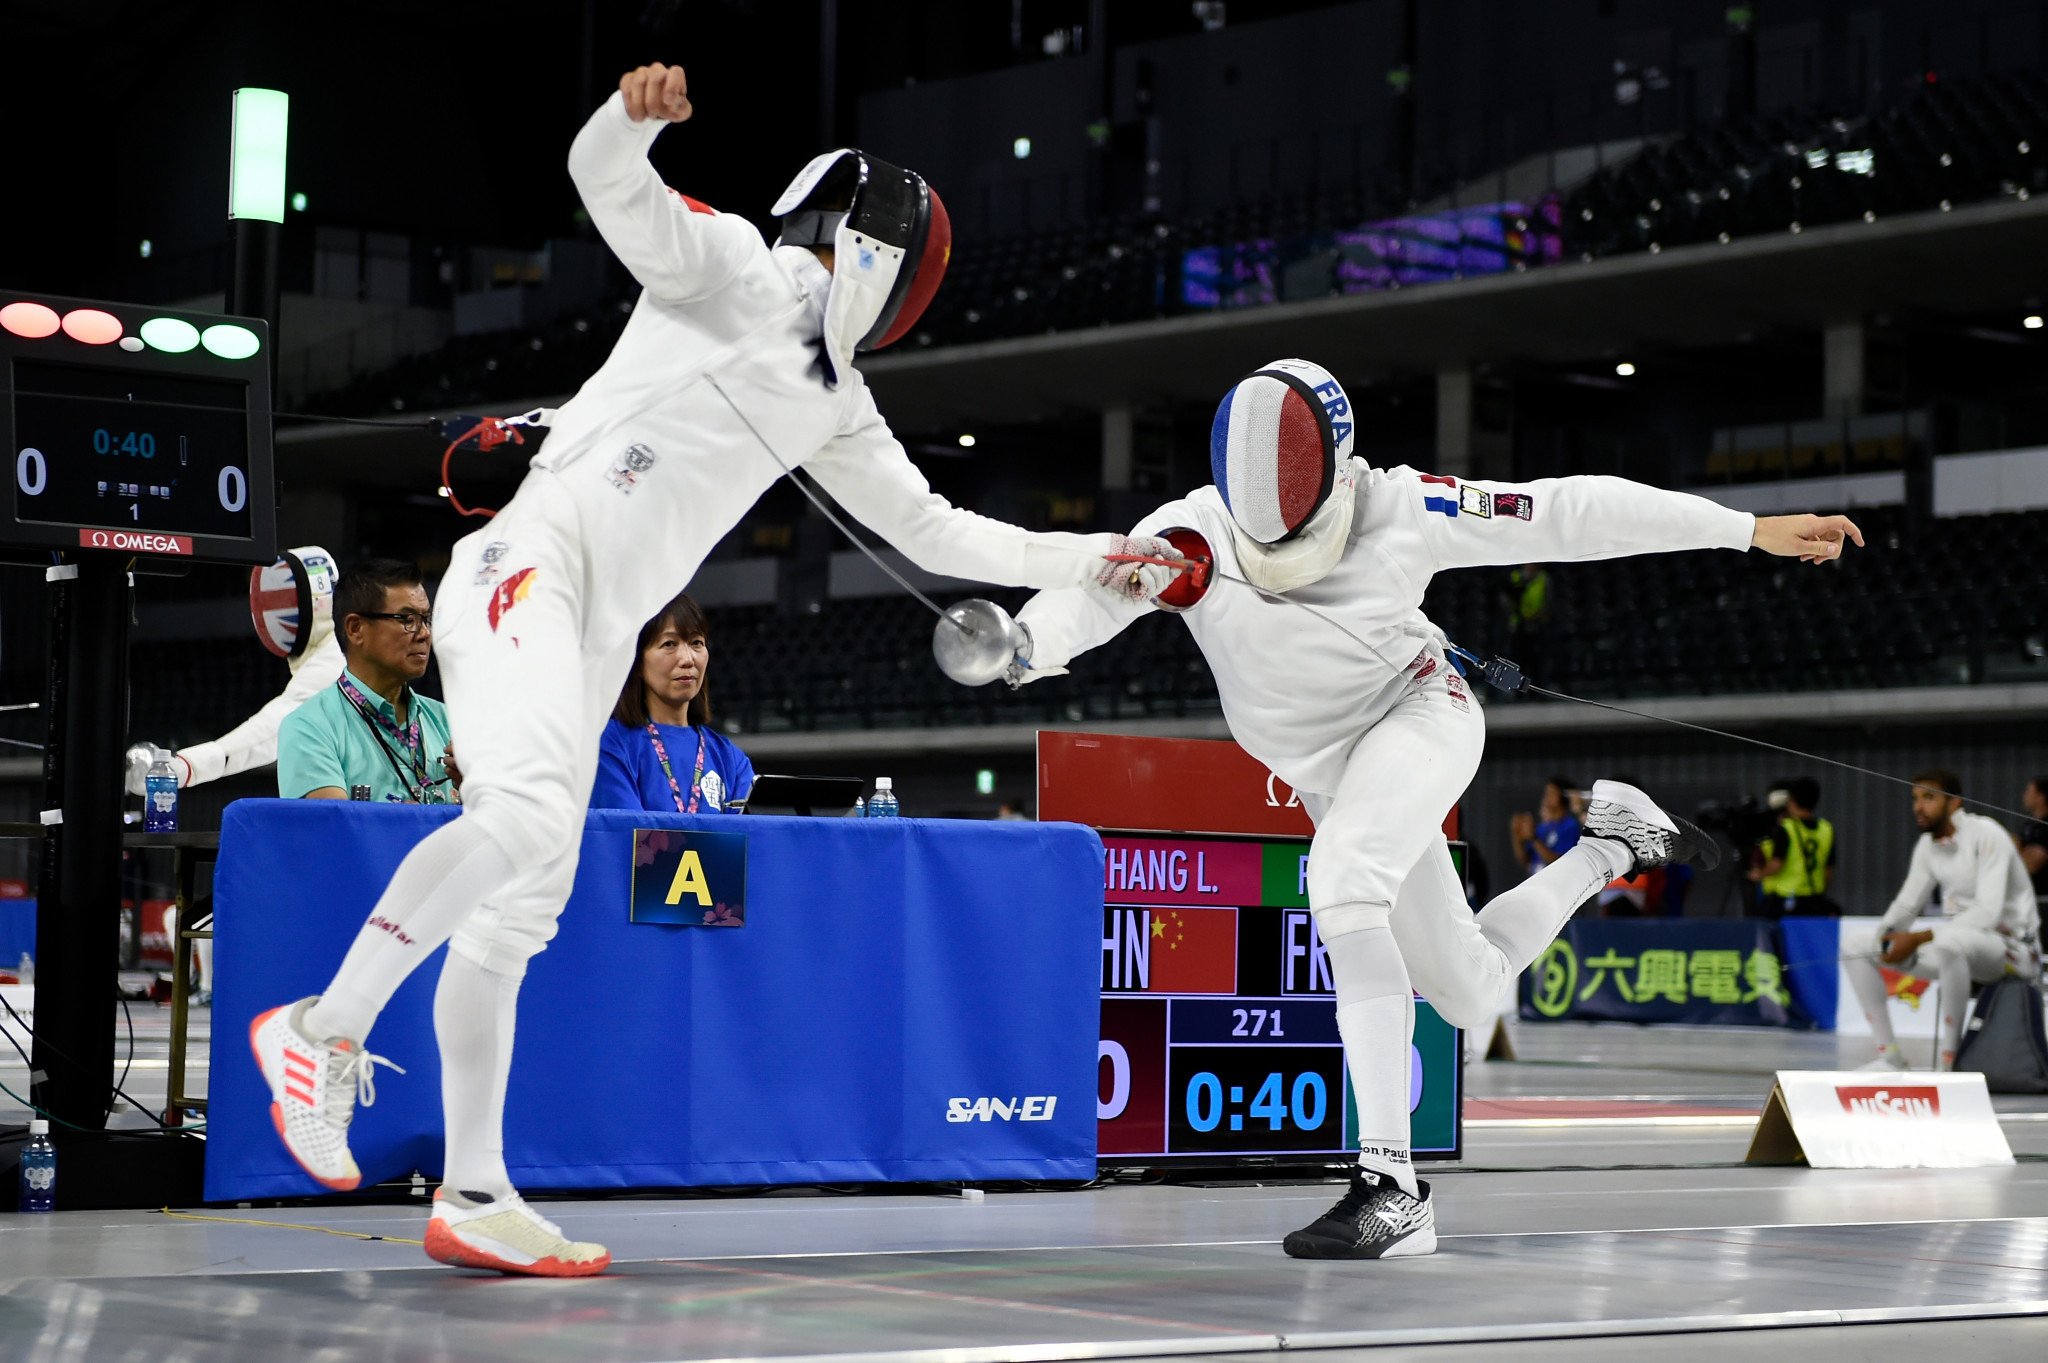 China's Zhang Linbin, left, made a promising start to the men's individual event ©Getty Images